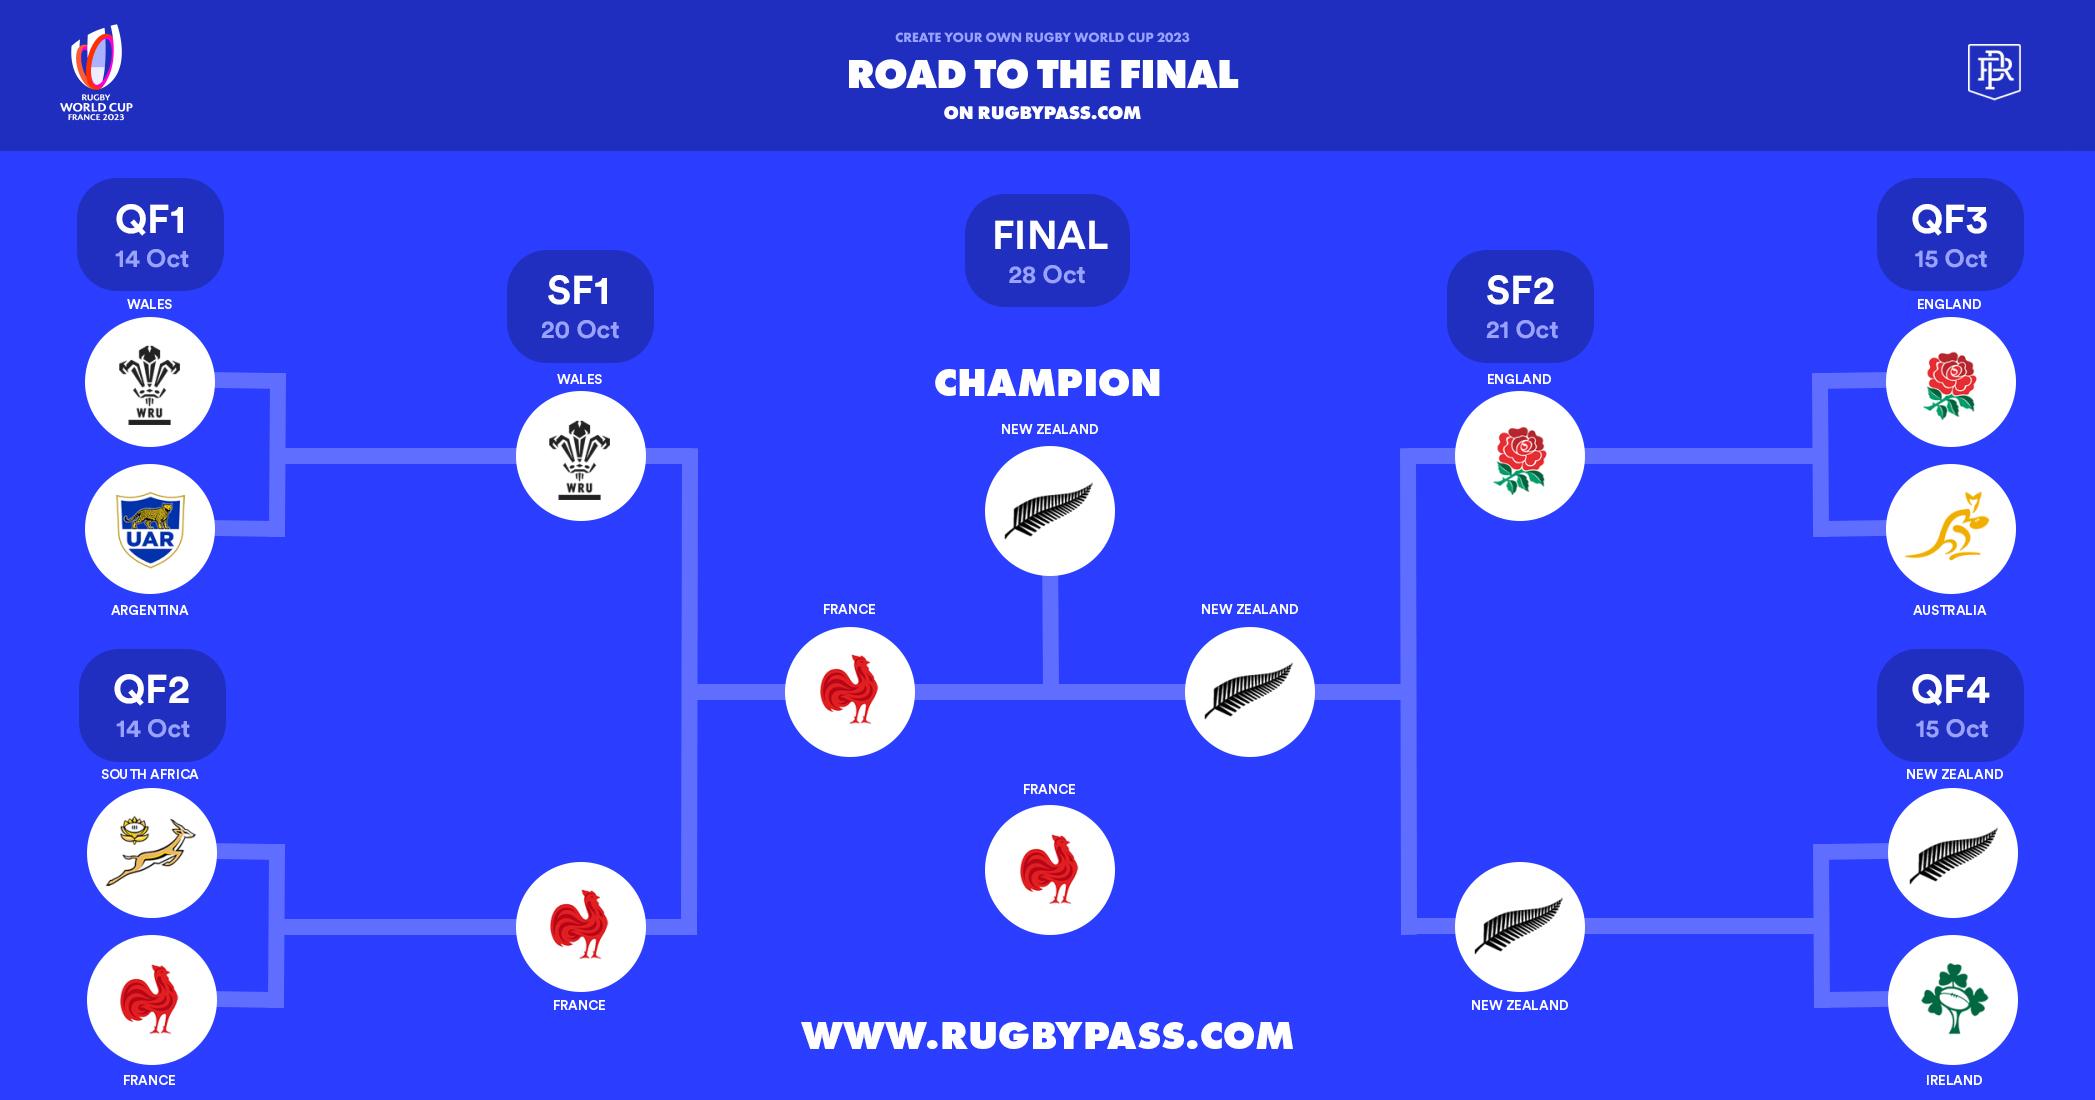 Road to the Final Rugby World Cup Predictor RugbyPass